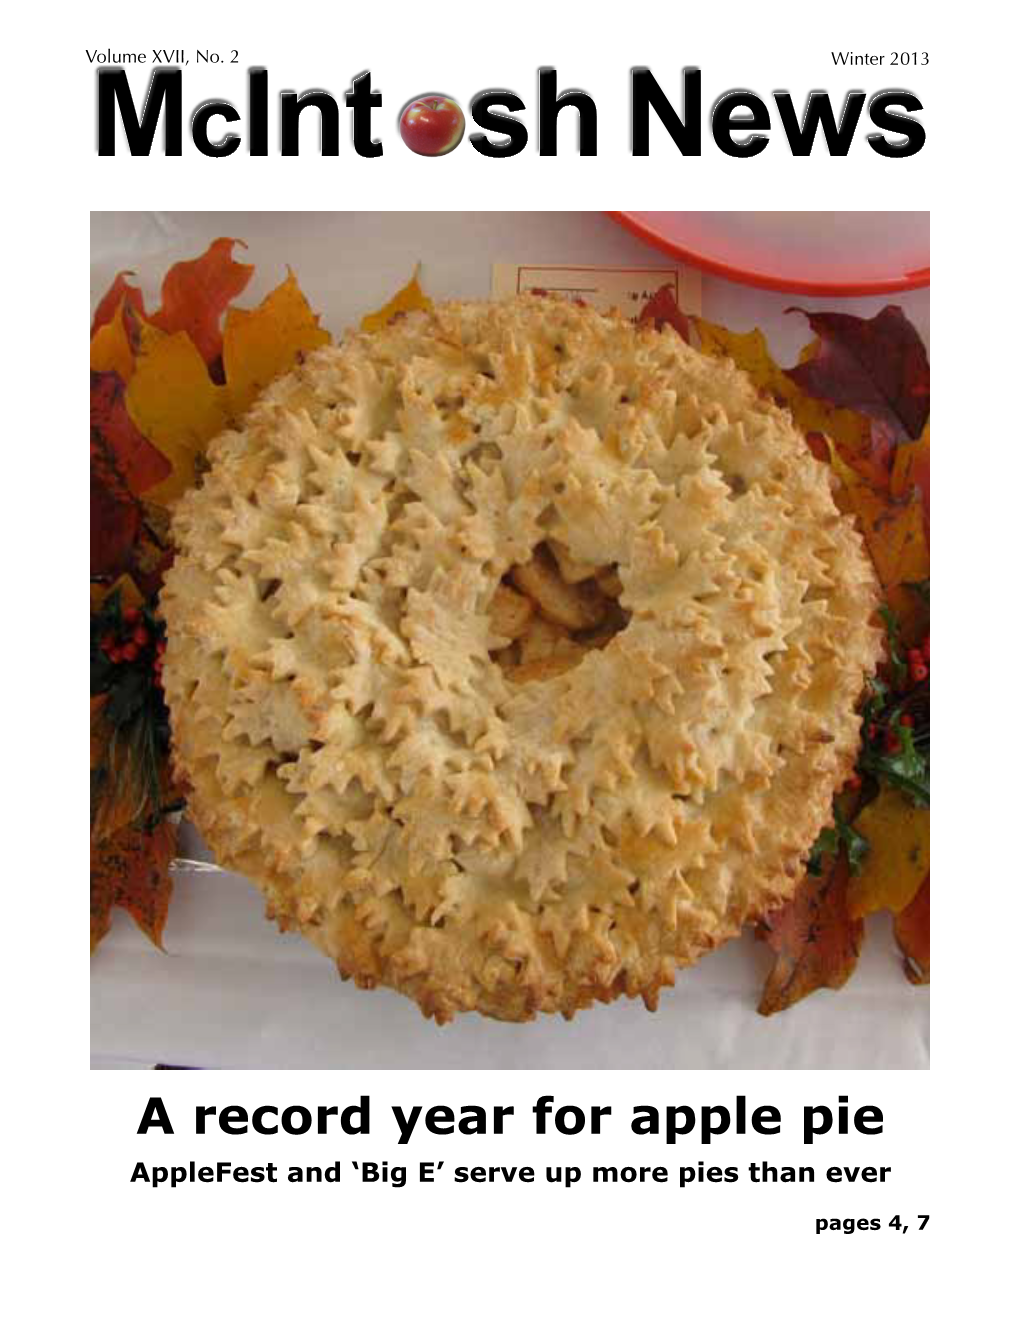 A Record Year for Apple Pie Applefest and ‘Big E’ Serve up More Pies Than Ever